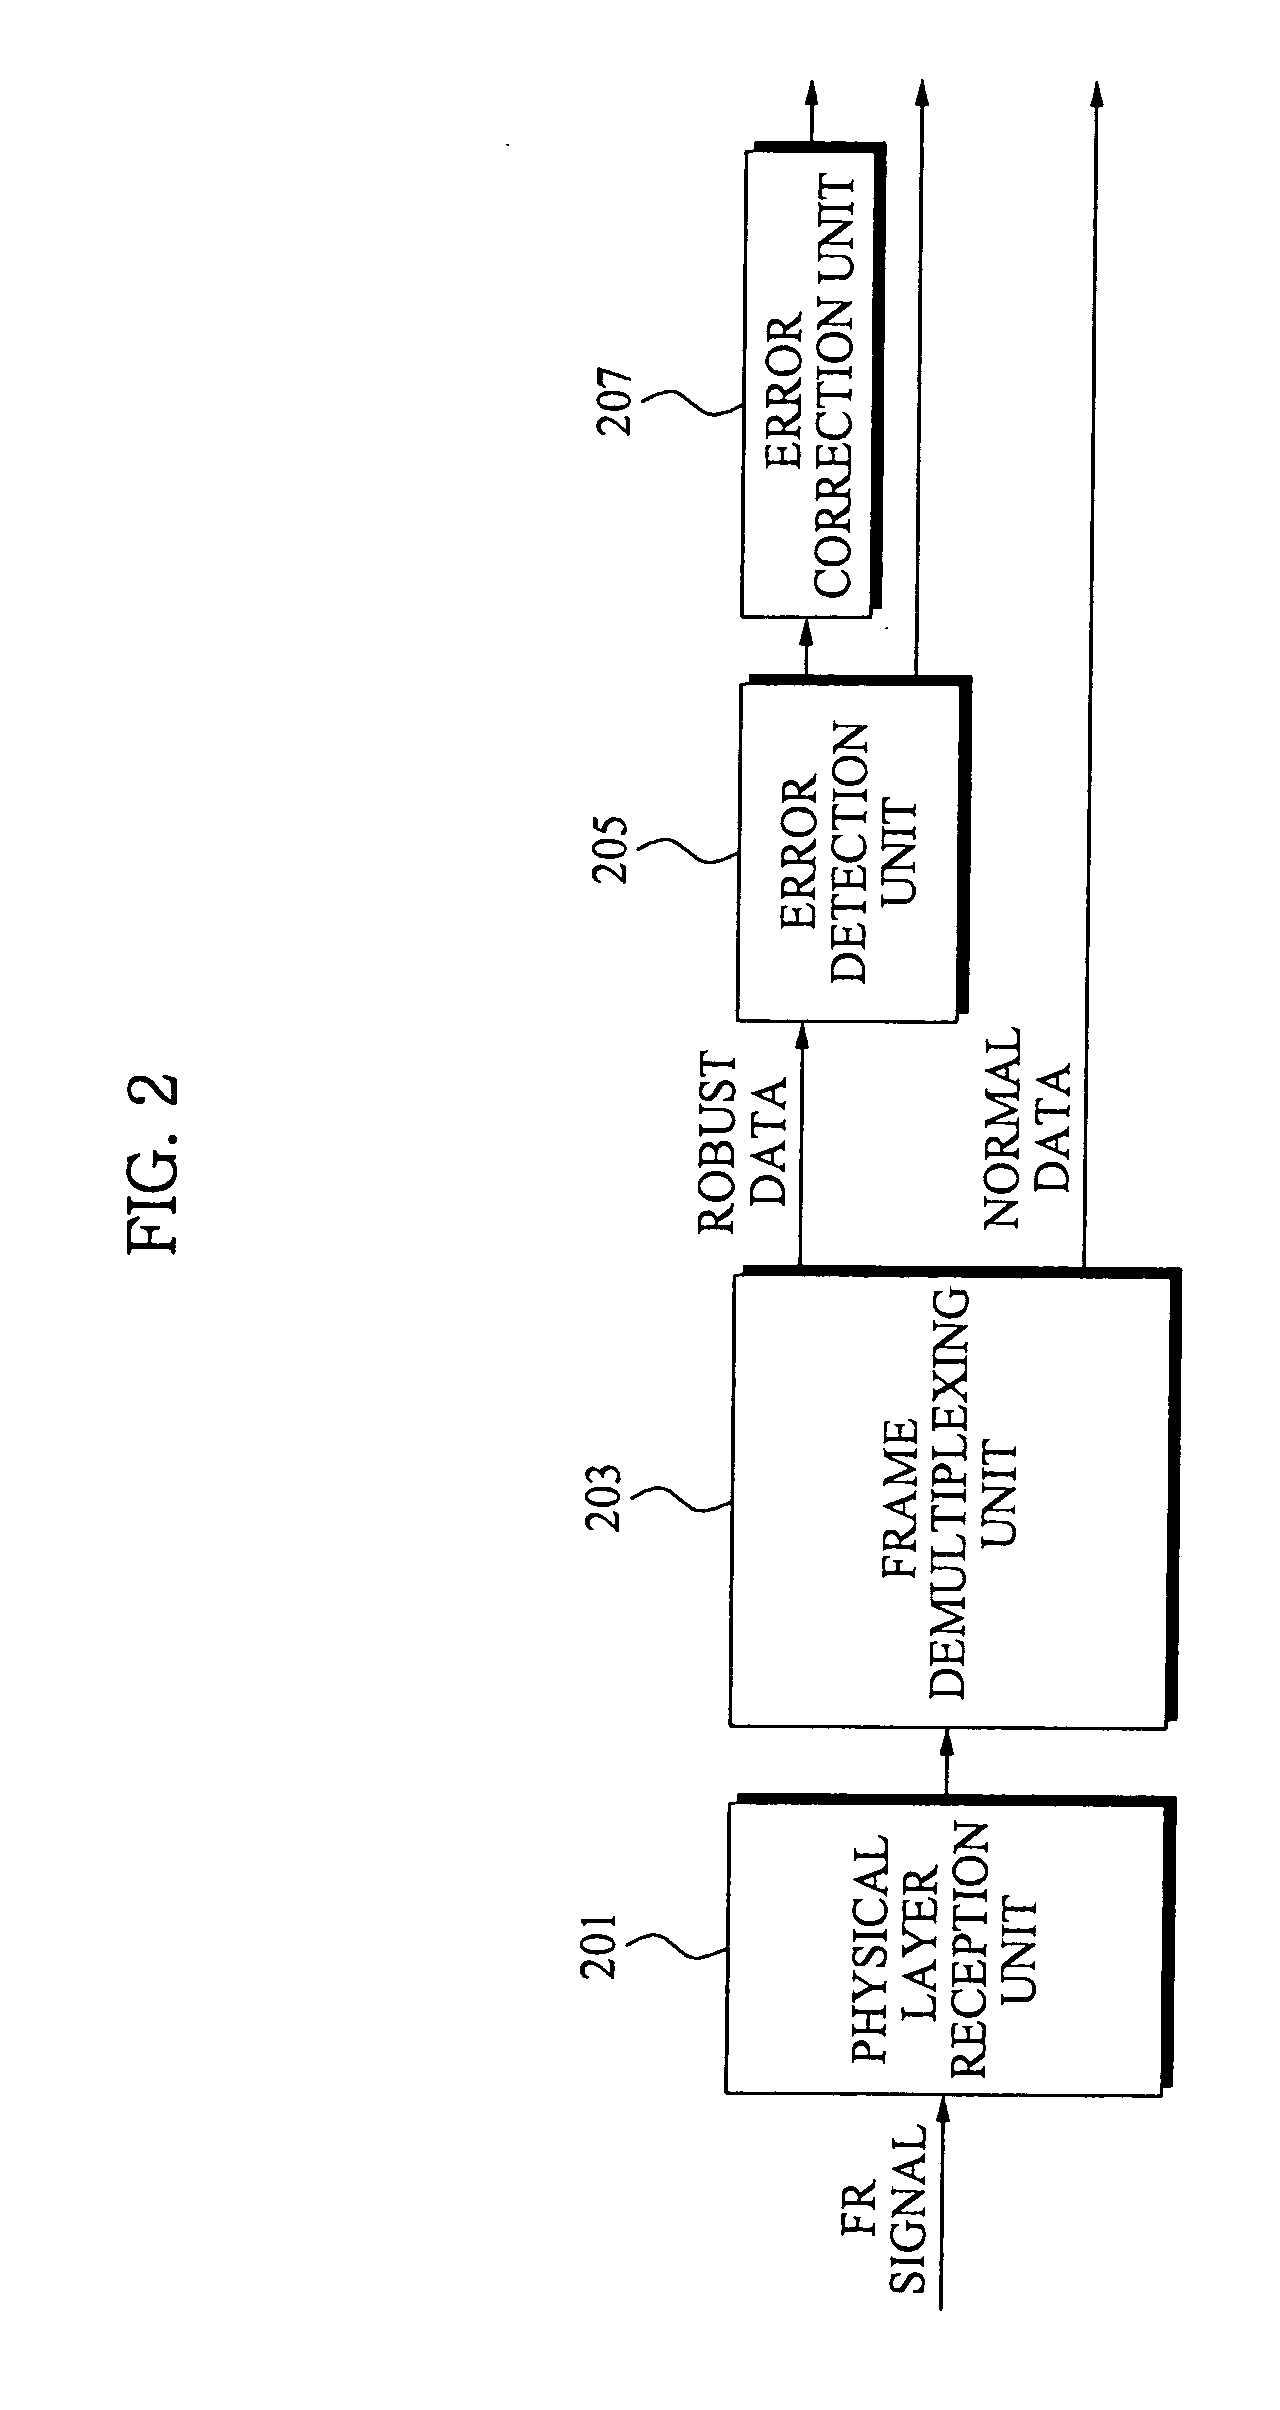 Apparatus for adaptable/variable type modulation and demodulation in digital tx/rx system